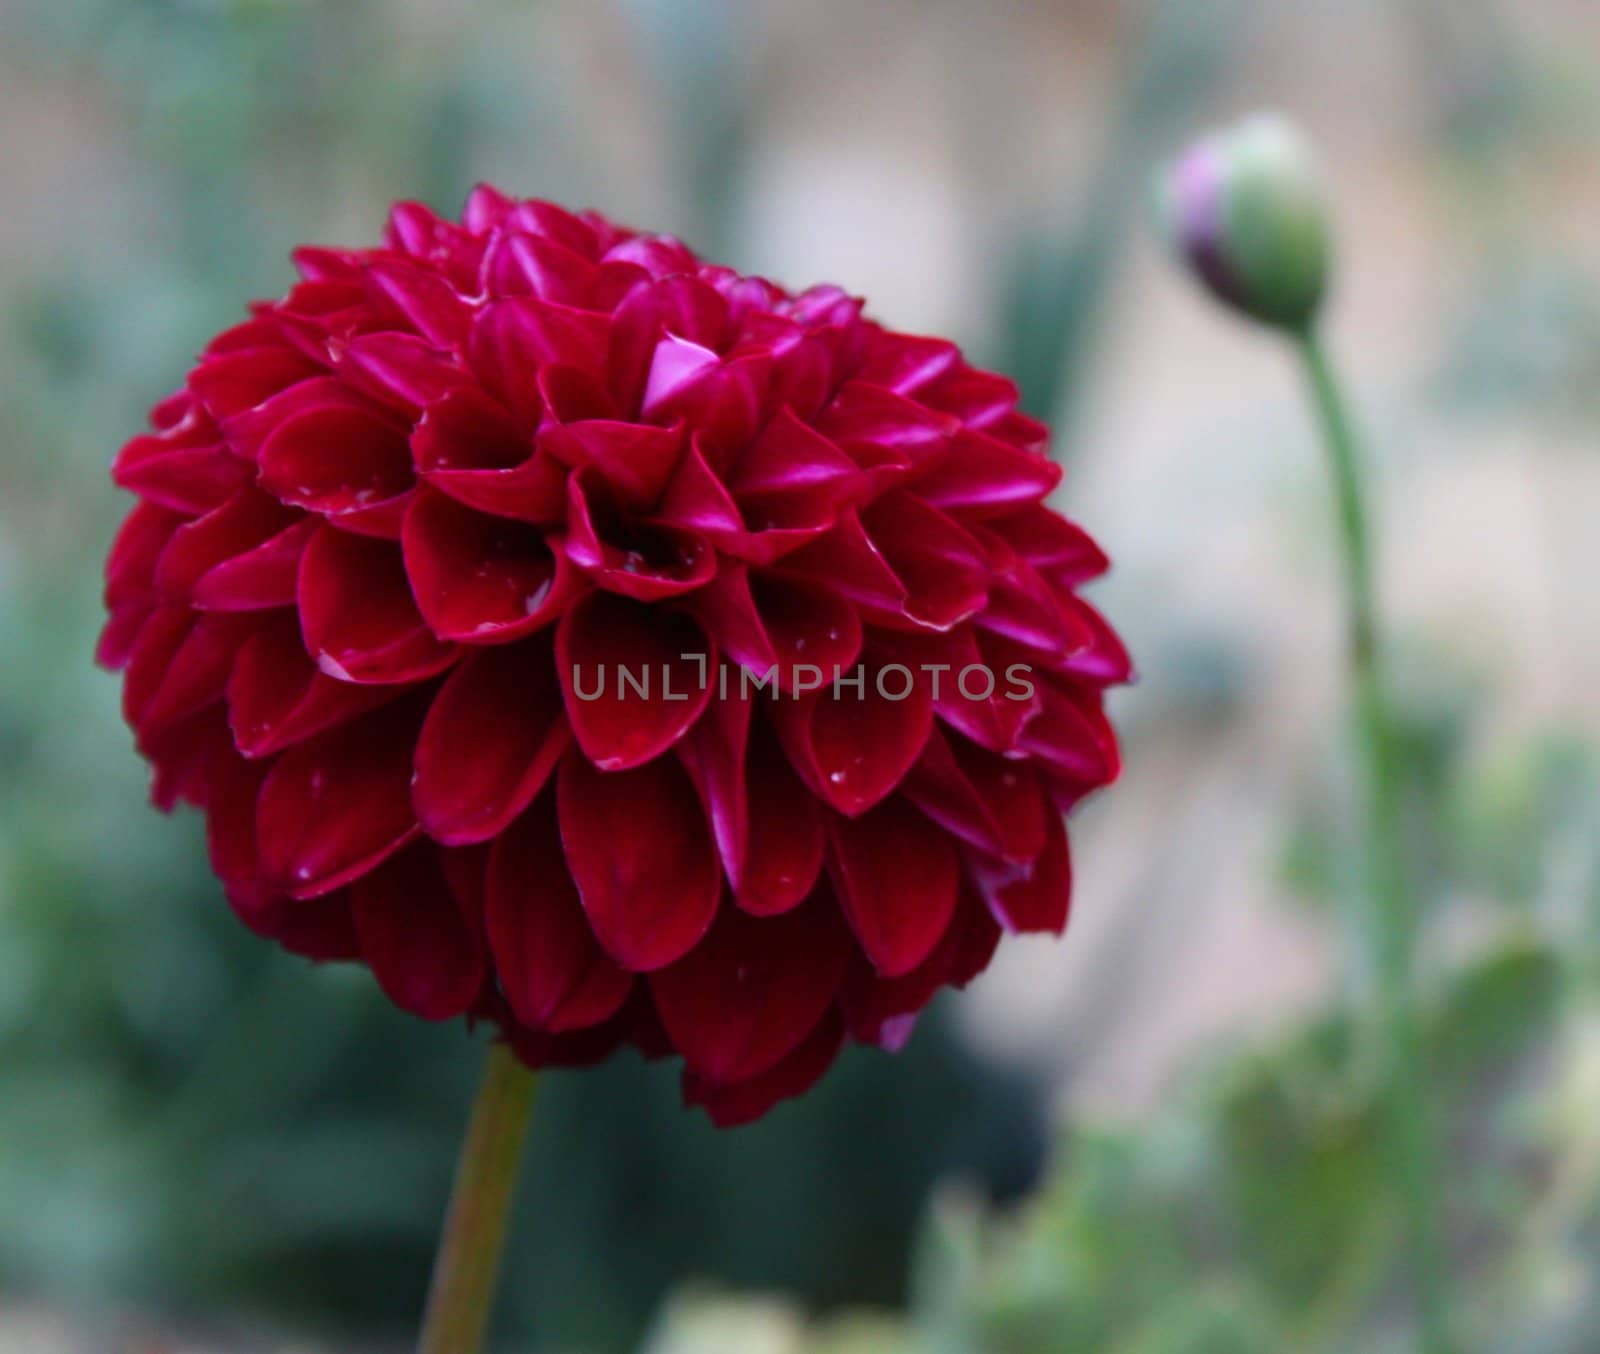 A Beautiful red flower